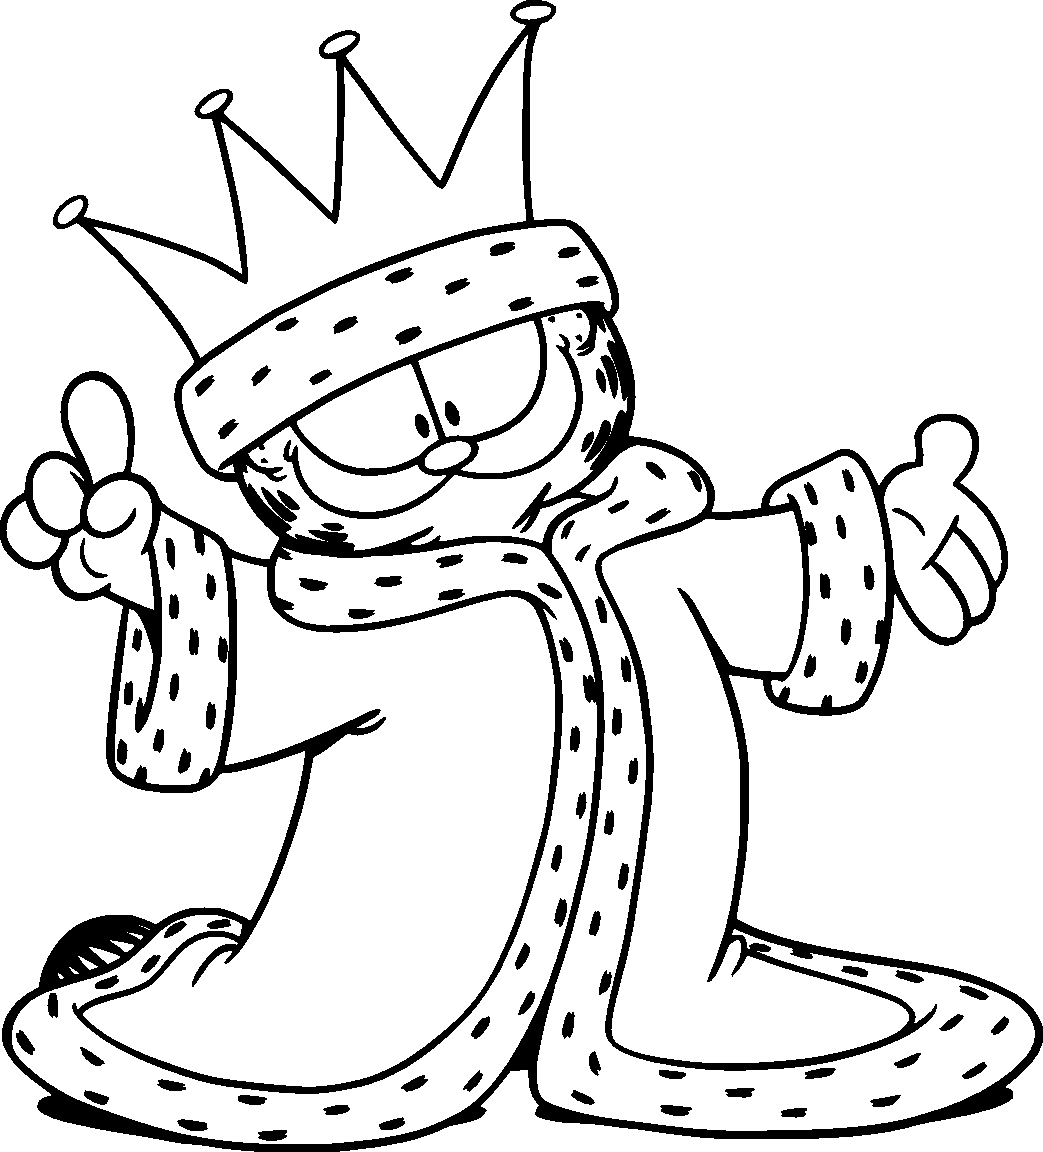 garfield colouring pages garfield coloring pages to download and print for free garfield colouring pages 